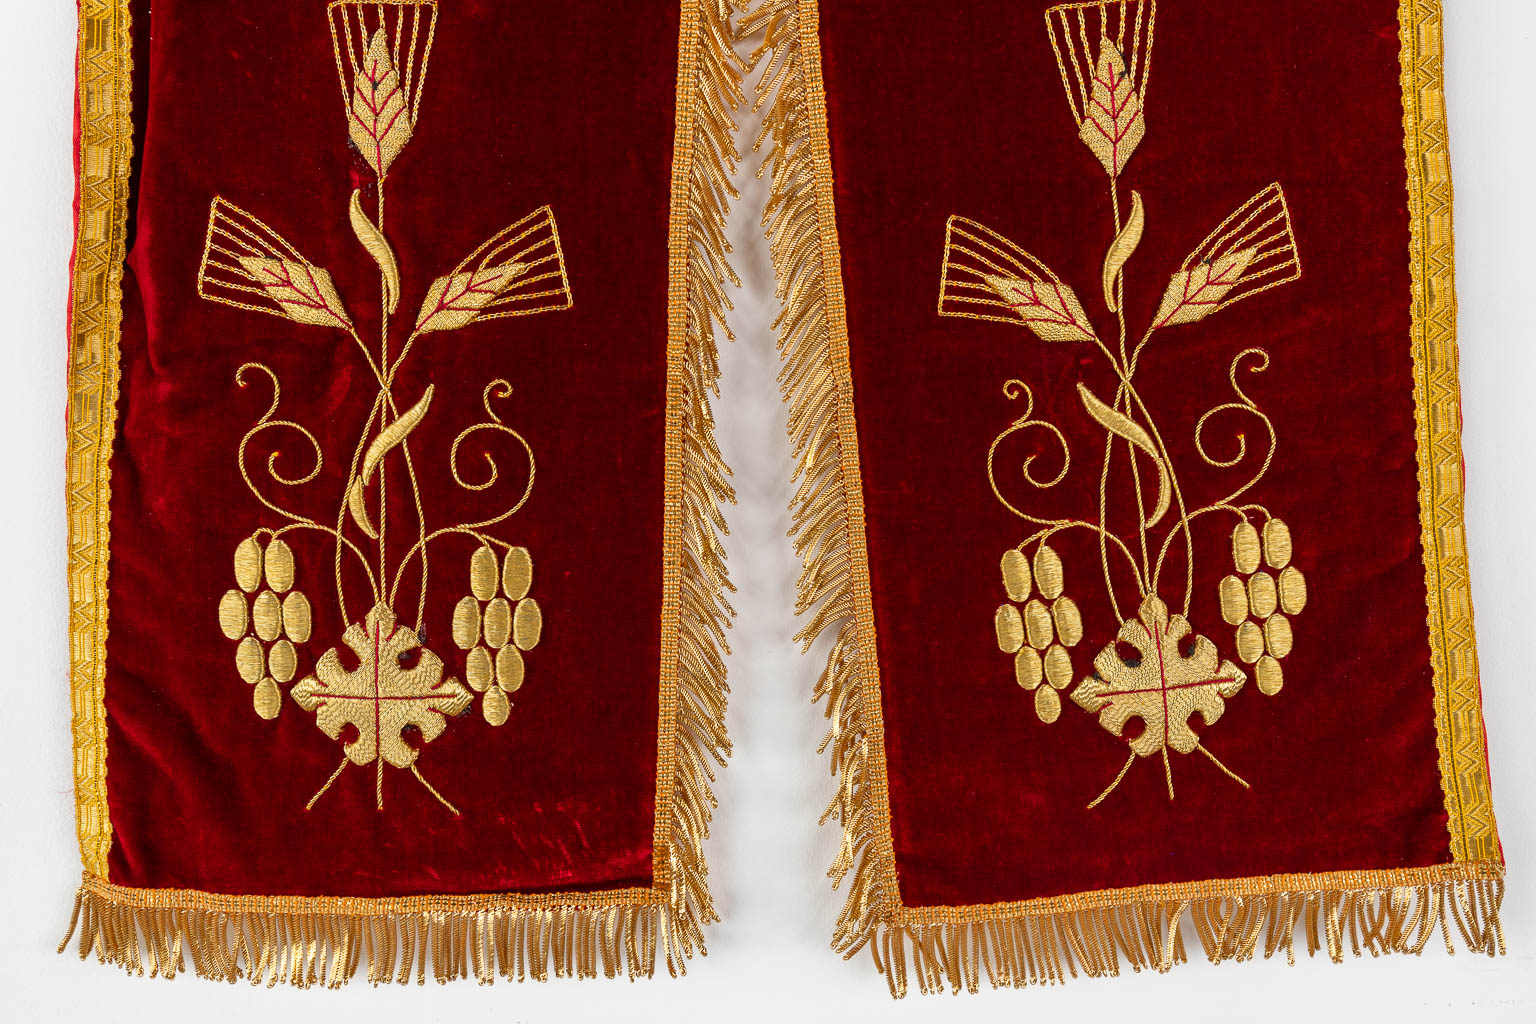 Four Roman Chasubles, Chalice veil, Stola and Maniple, thick gold thread embroideries.